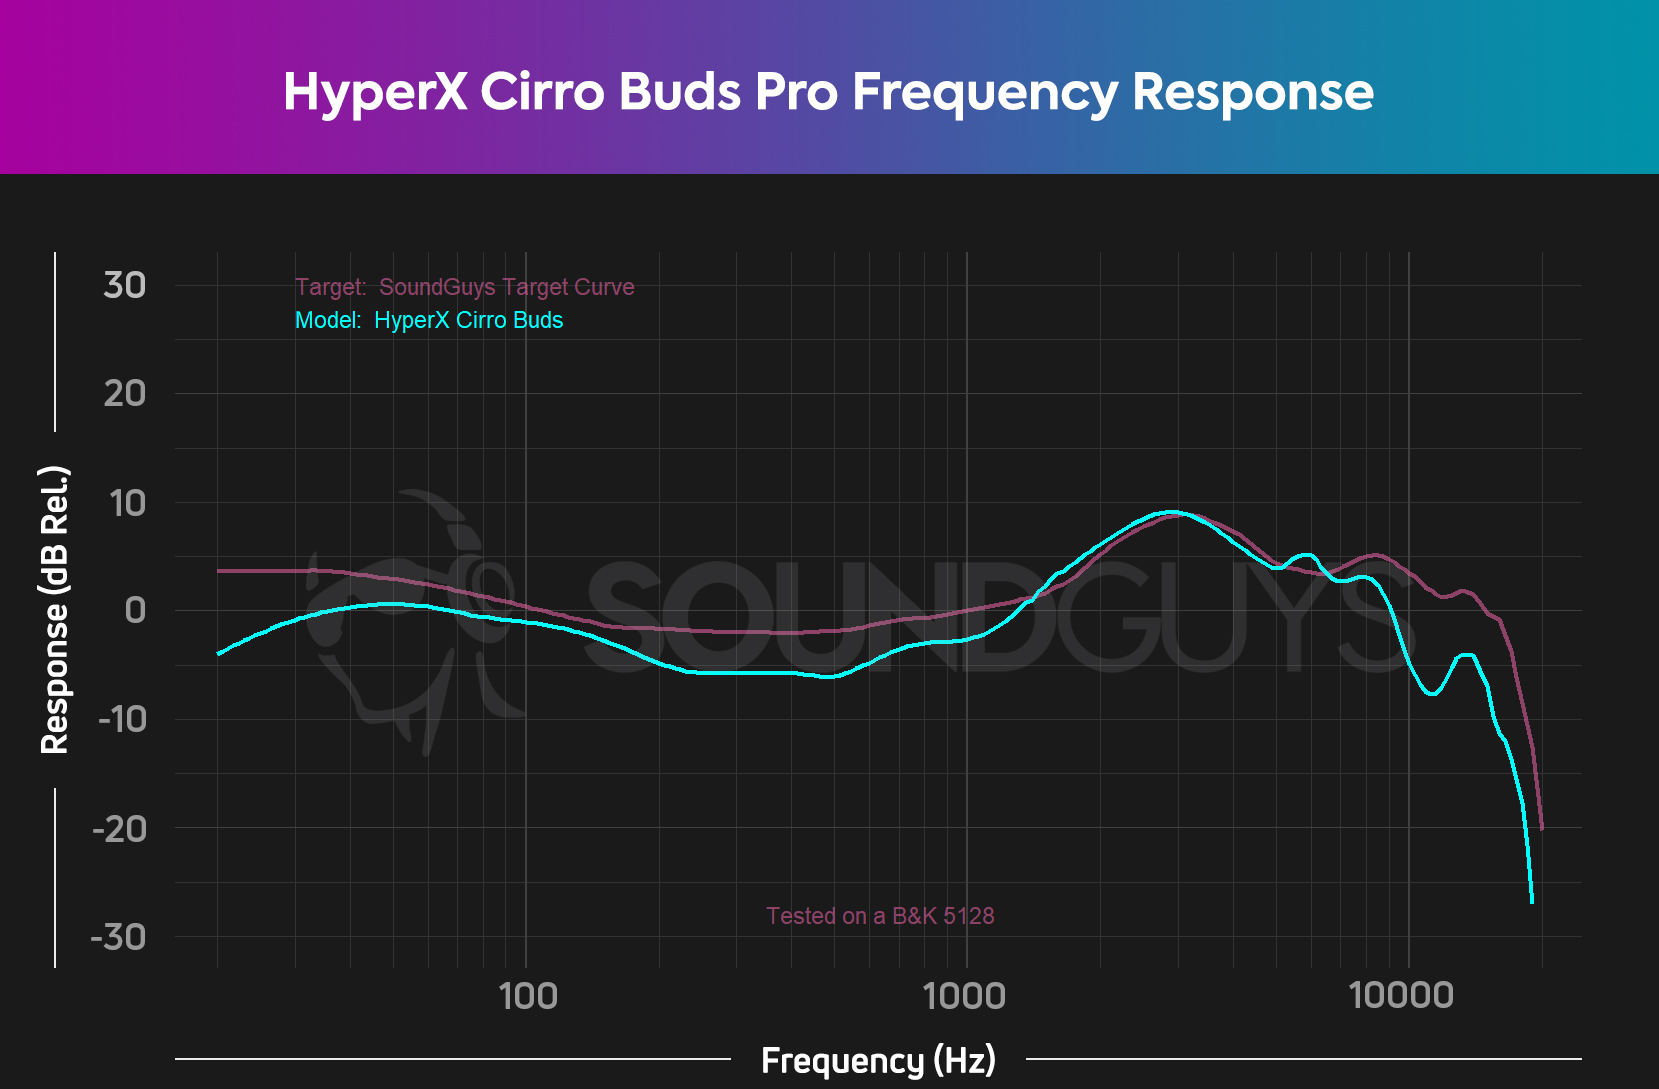 A plot showing the frequency response of the HyperX Cirro Buds Pro.